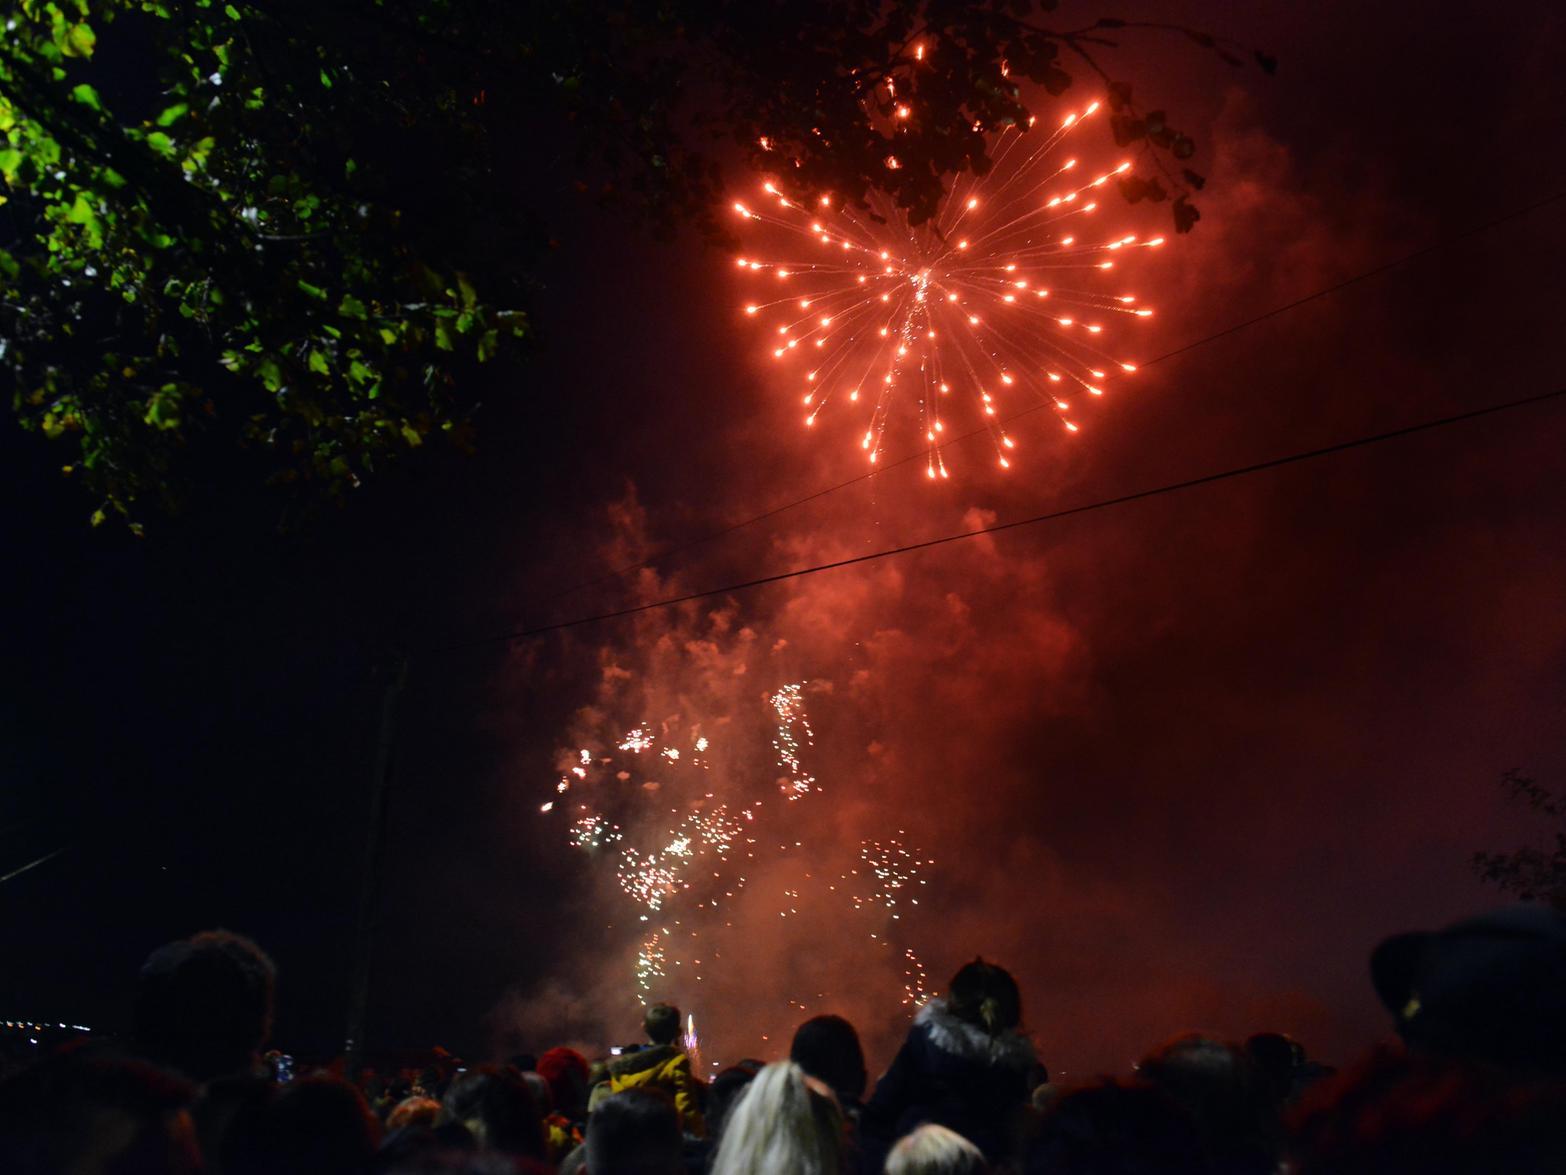 The celebrations kick off at 4.30pm, with food stalls serving pies, burgers and pizzas and three bars for the adults. The bonfire is lit at 6.30pm with a big fireworks display at 7.30pm. Cost: free